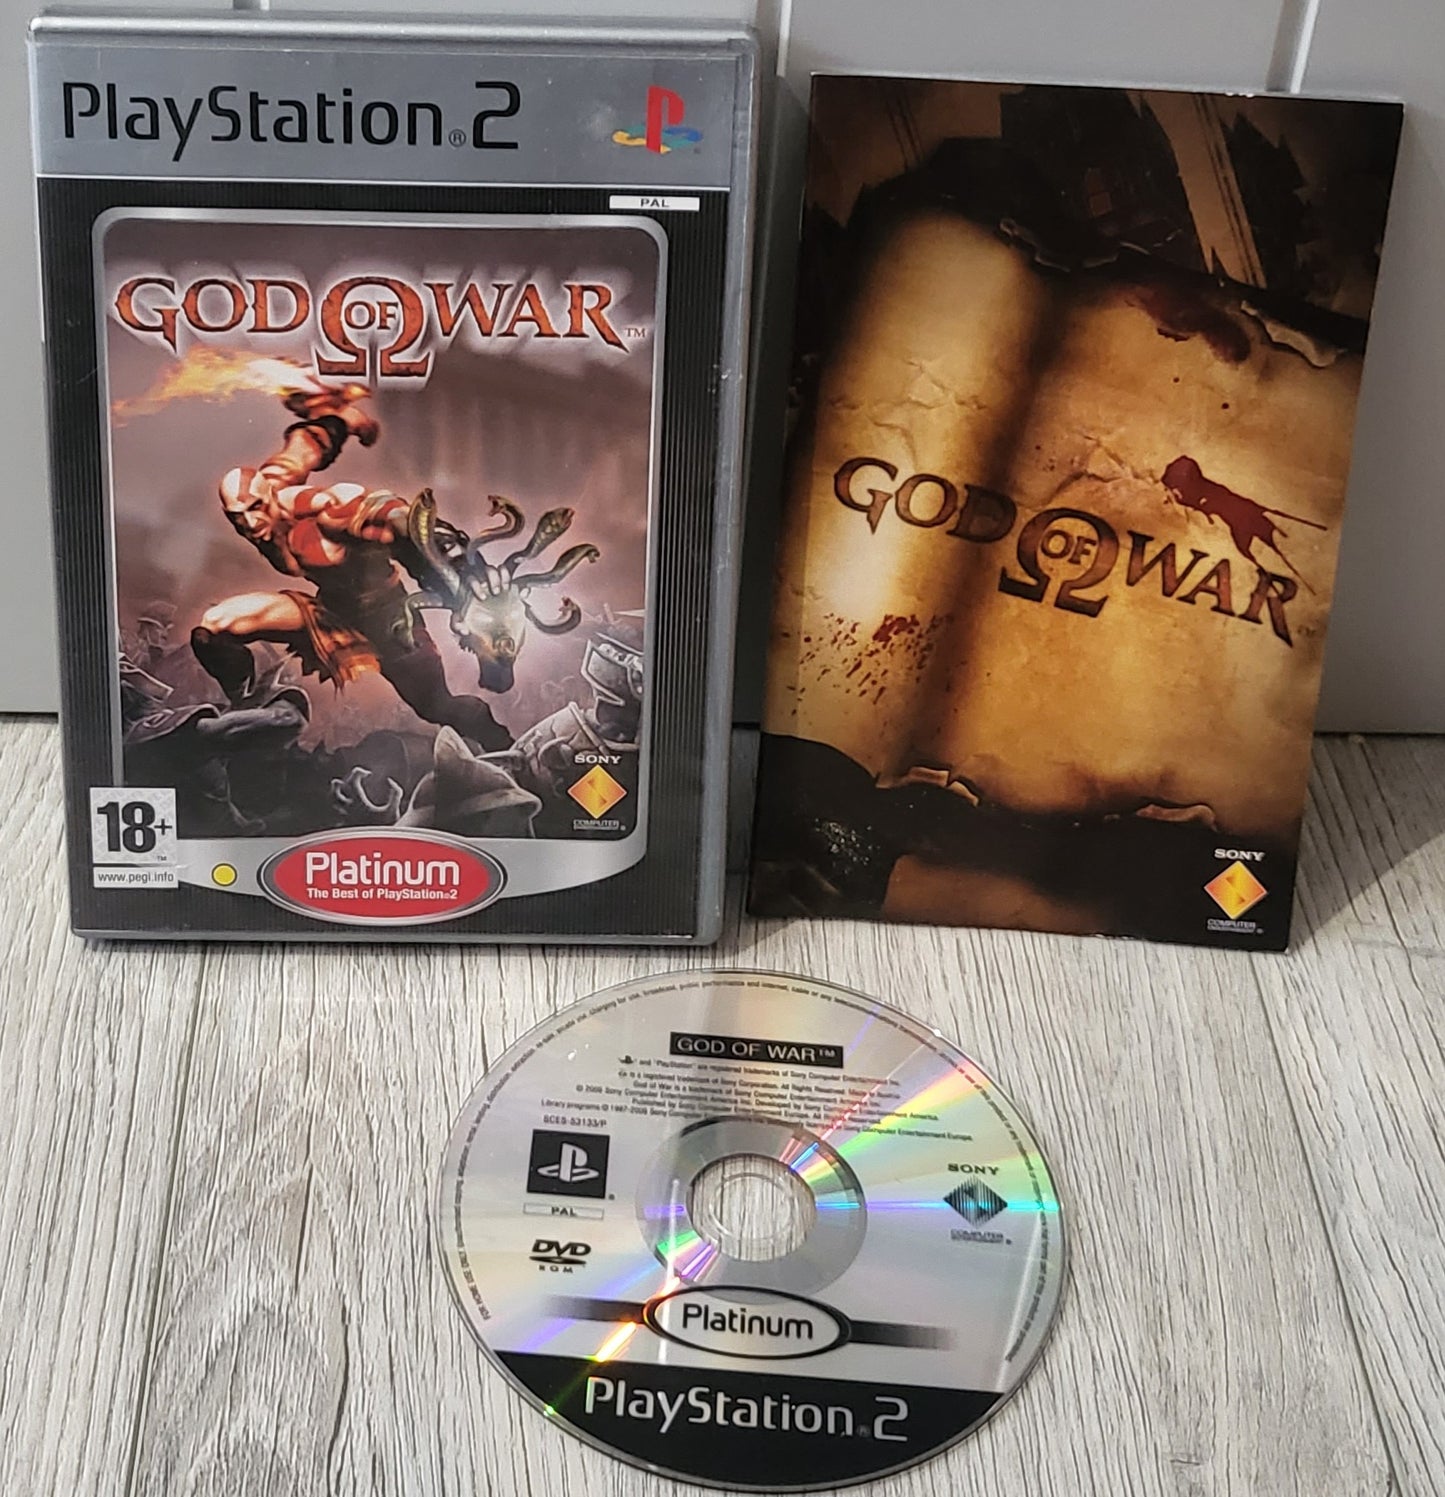 God of War Sony Playstation 2 (PS2) Game